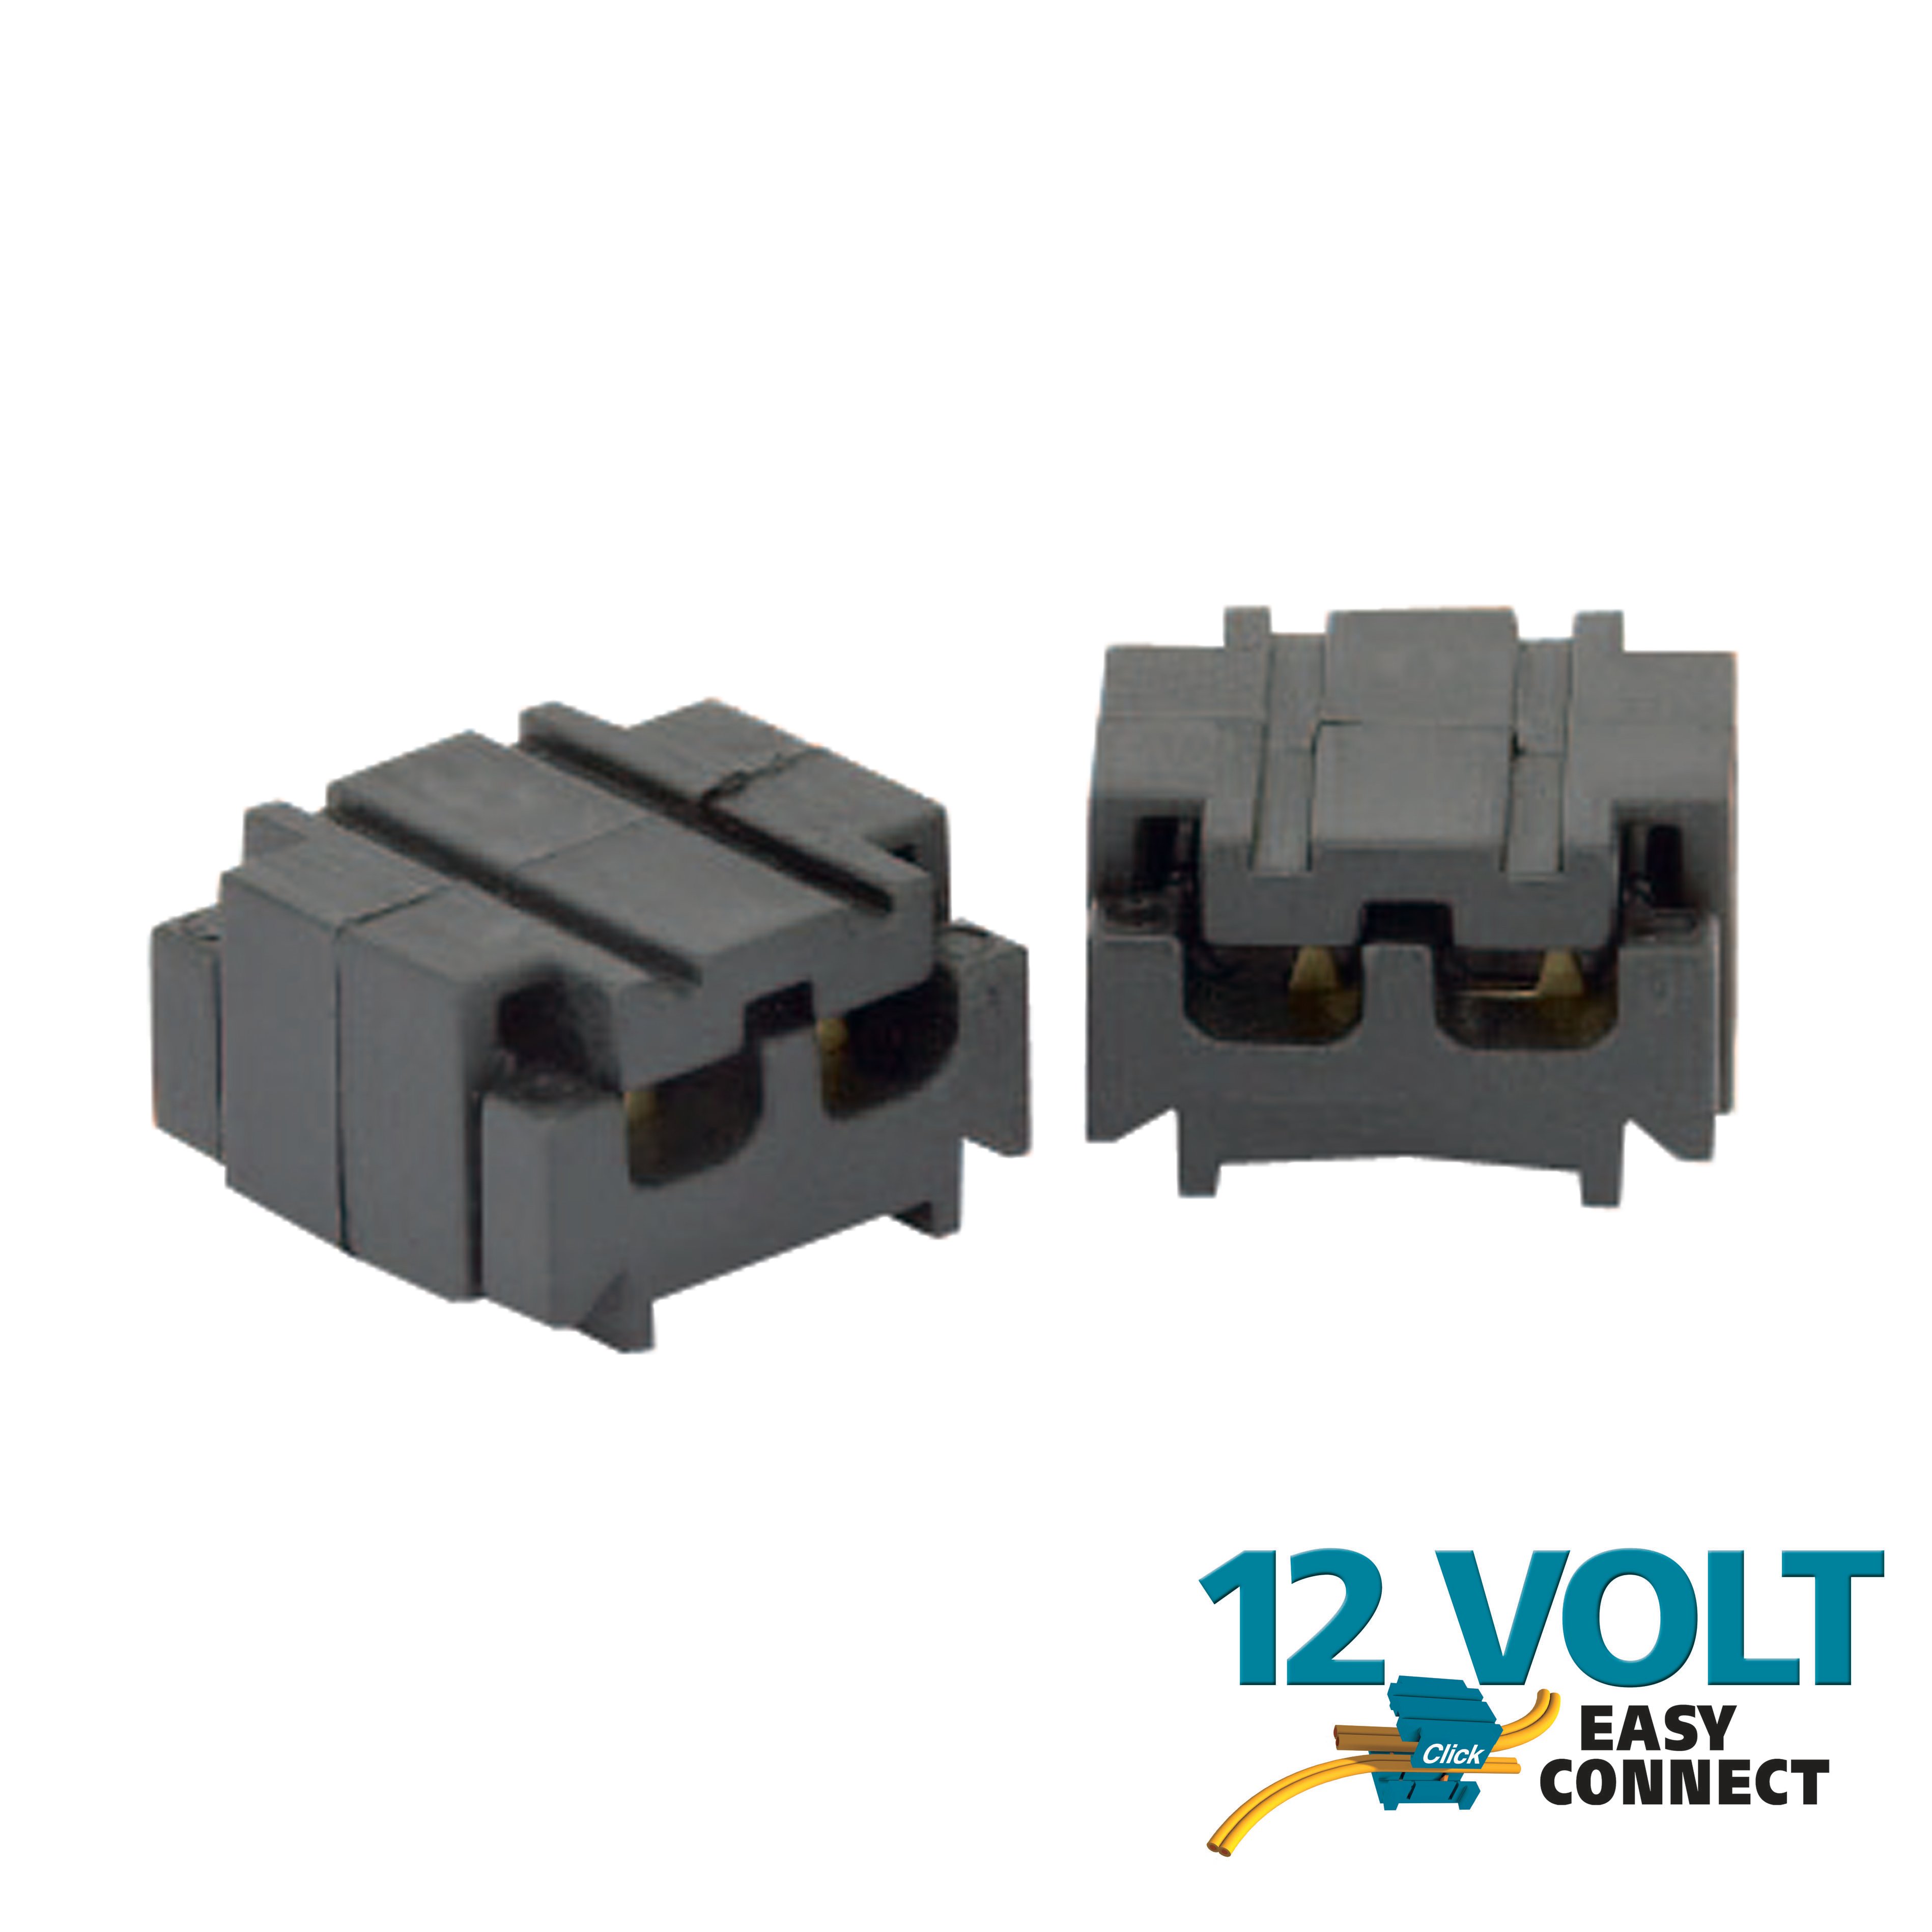 Luxform SPT1 to SPT1 Cable Connector 2 Pack